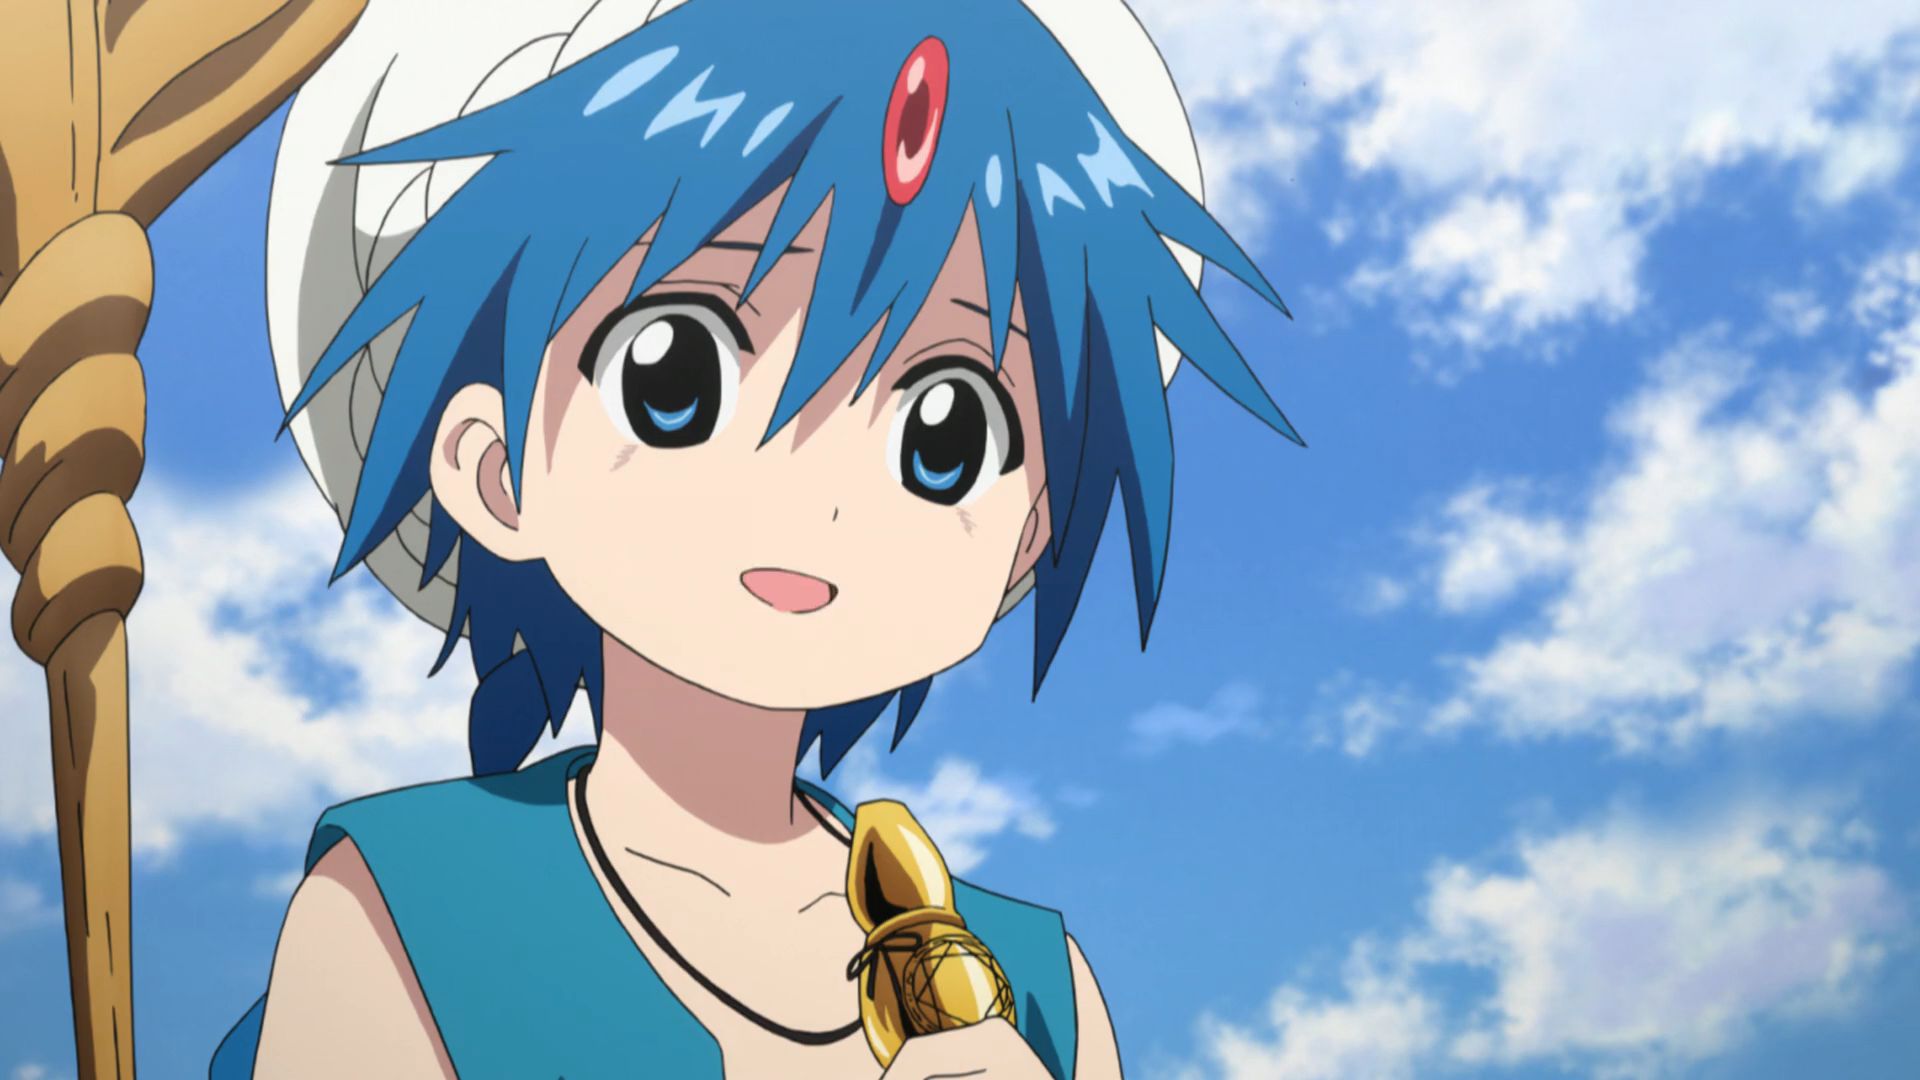 Aladdin from Magi: The Labyrinth Of Magic is one of the cute anime boys.